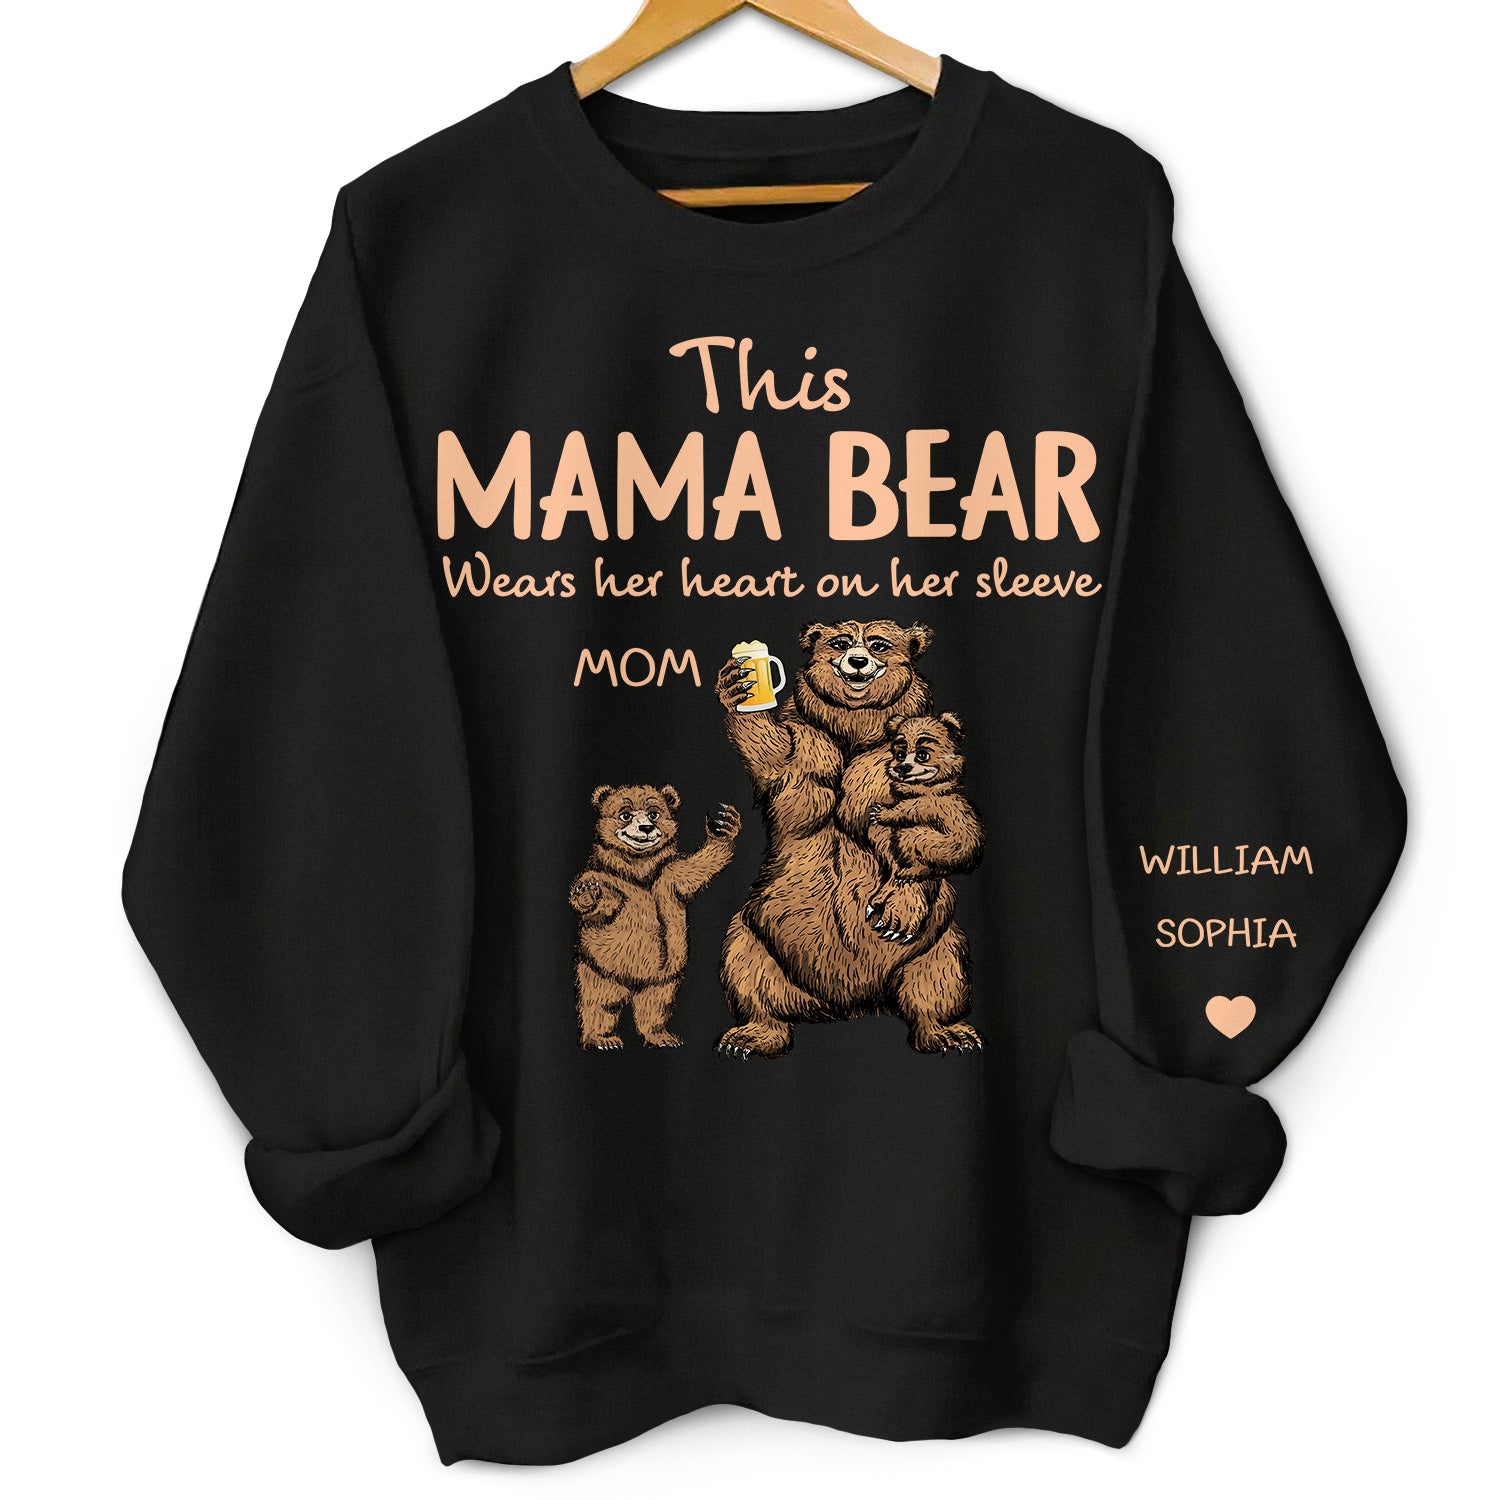 This Mama Bear Wears Her Heart - Gift For Mom, Nana - Personalized Unisex Sweatshirt With Design On Sleeve